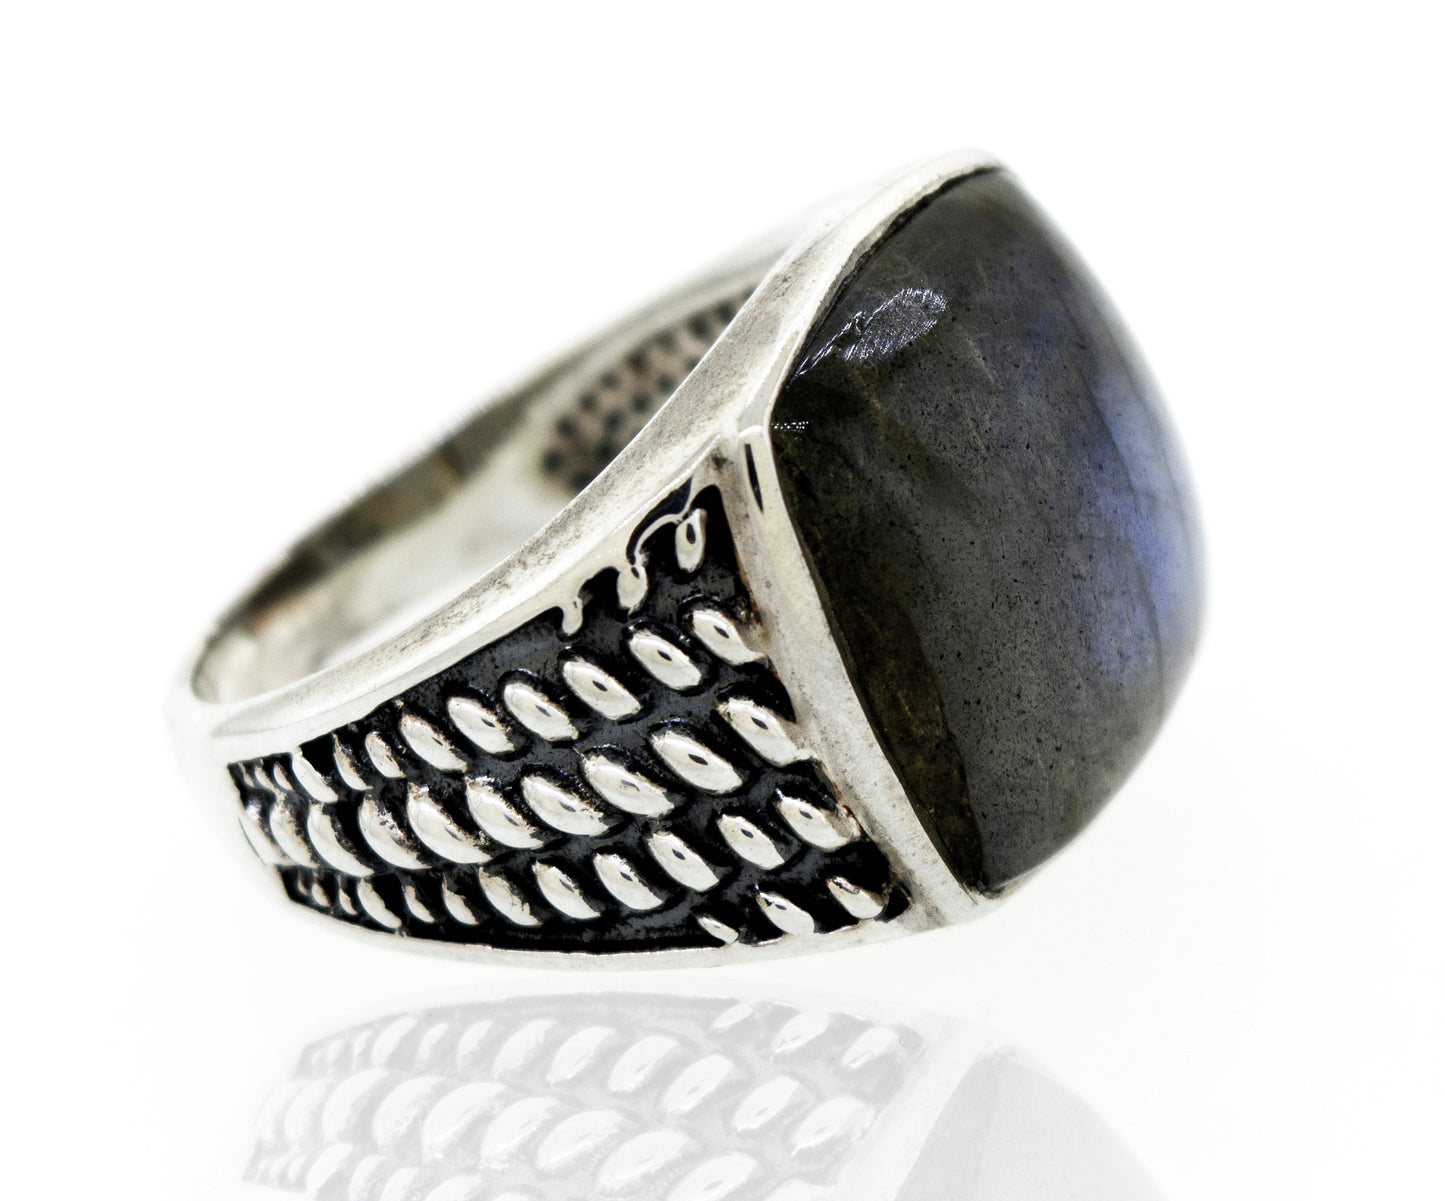 A Labradorite Signet Ring With Rope Design with a labradorite stone.